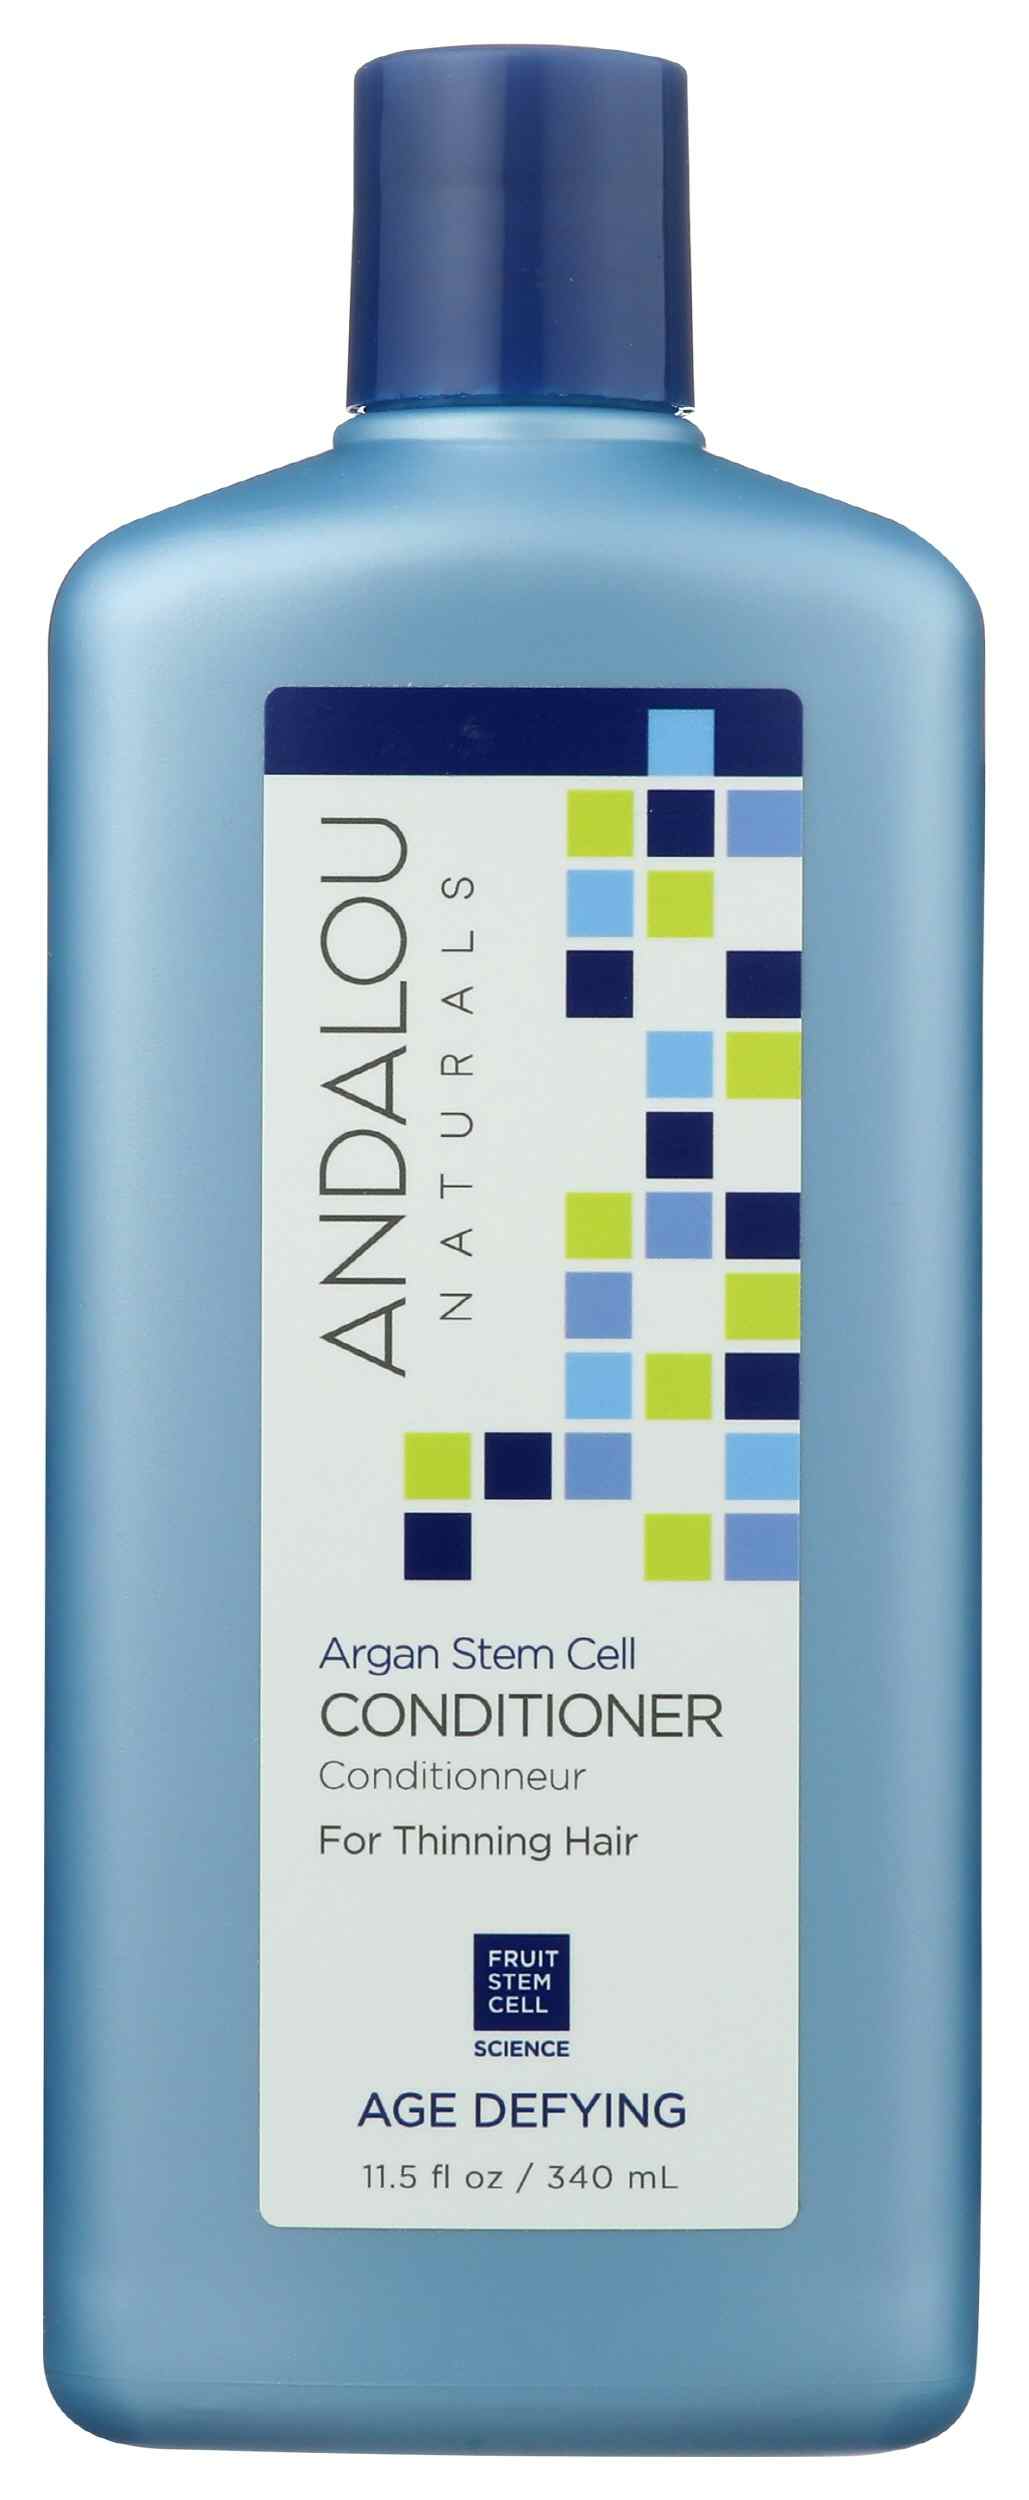 Andalou Naturals Argan Stem Cell Age Defying Conditioner